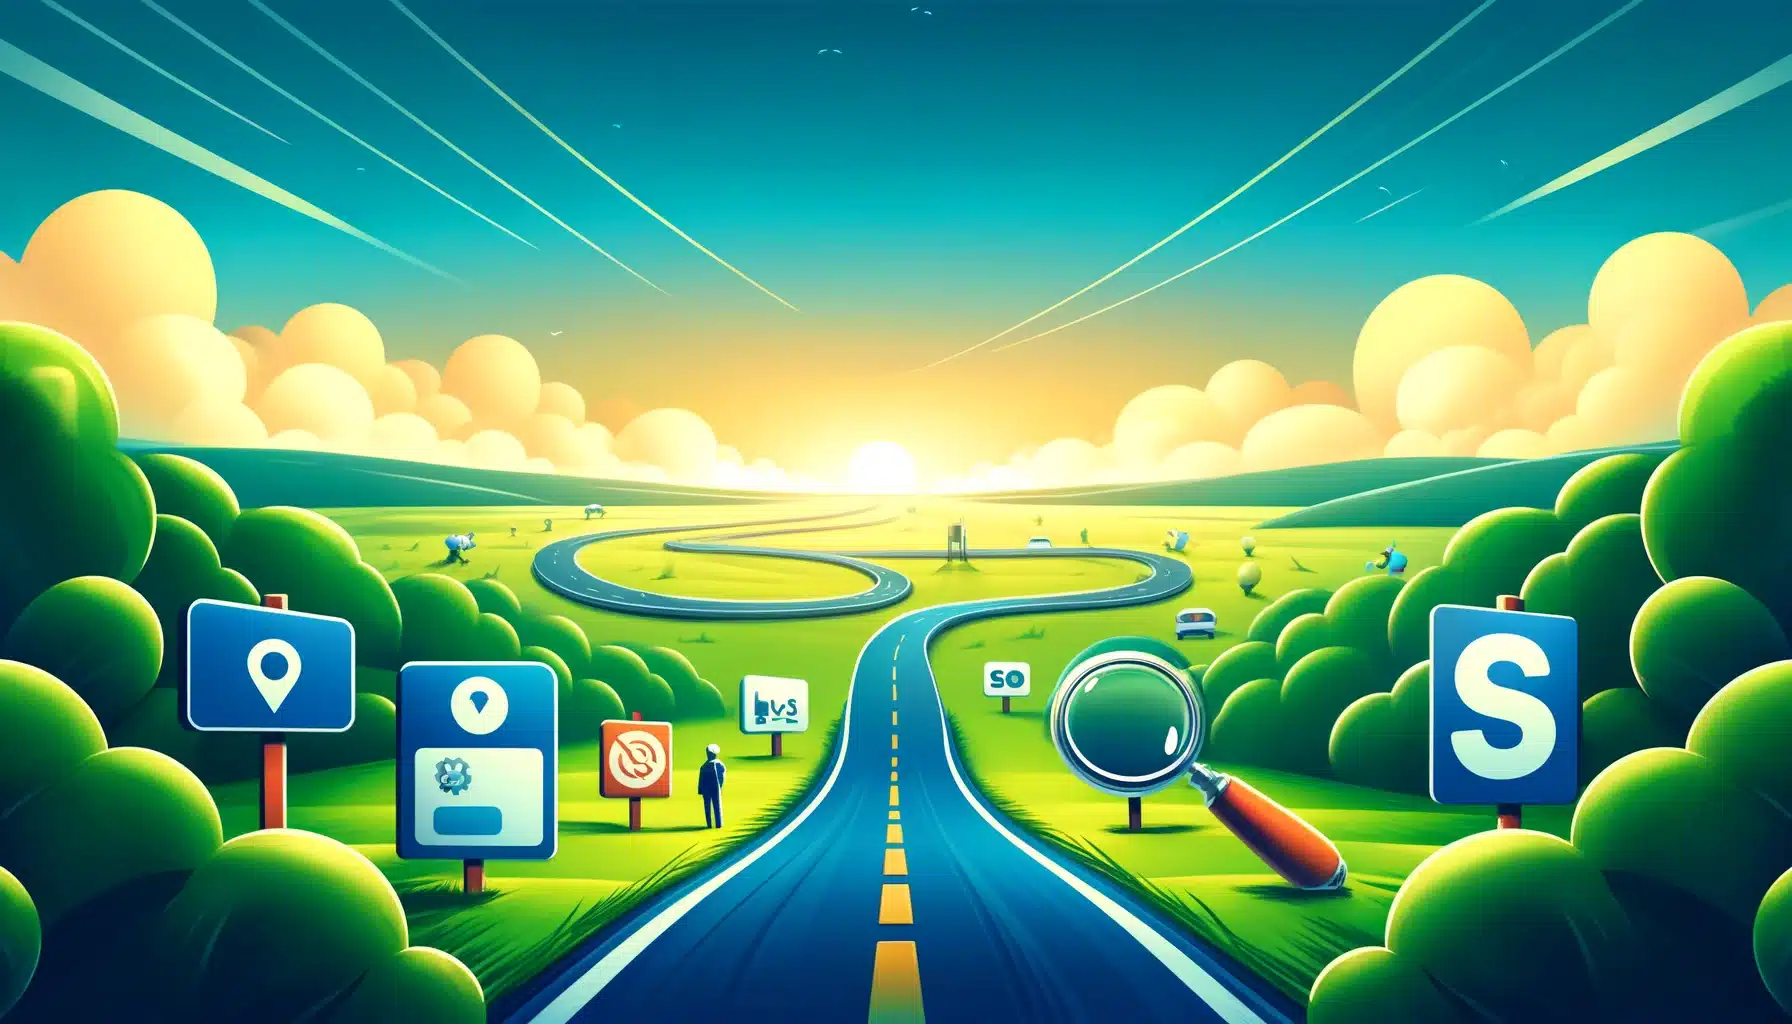 a vivid and simplified visual metaphor for seo as a 'long term strategy'. the image shows a long, winding road stretching far into a horizon under a b